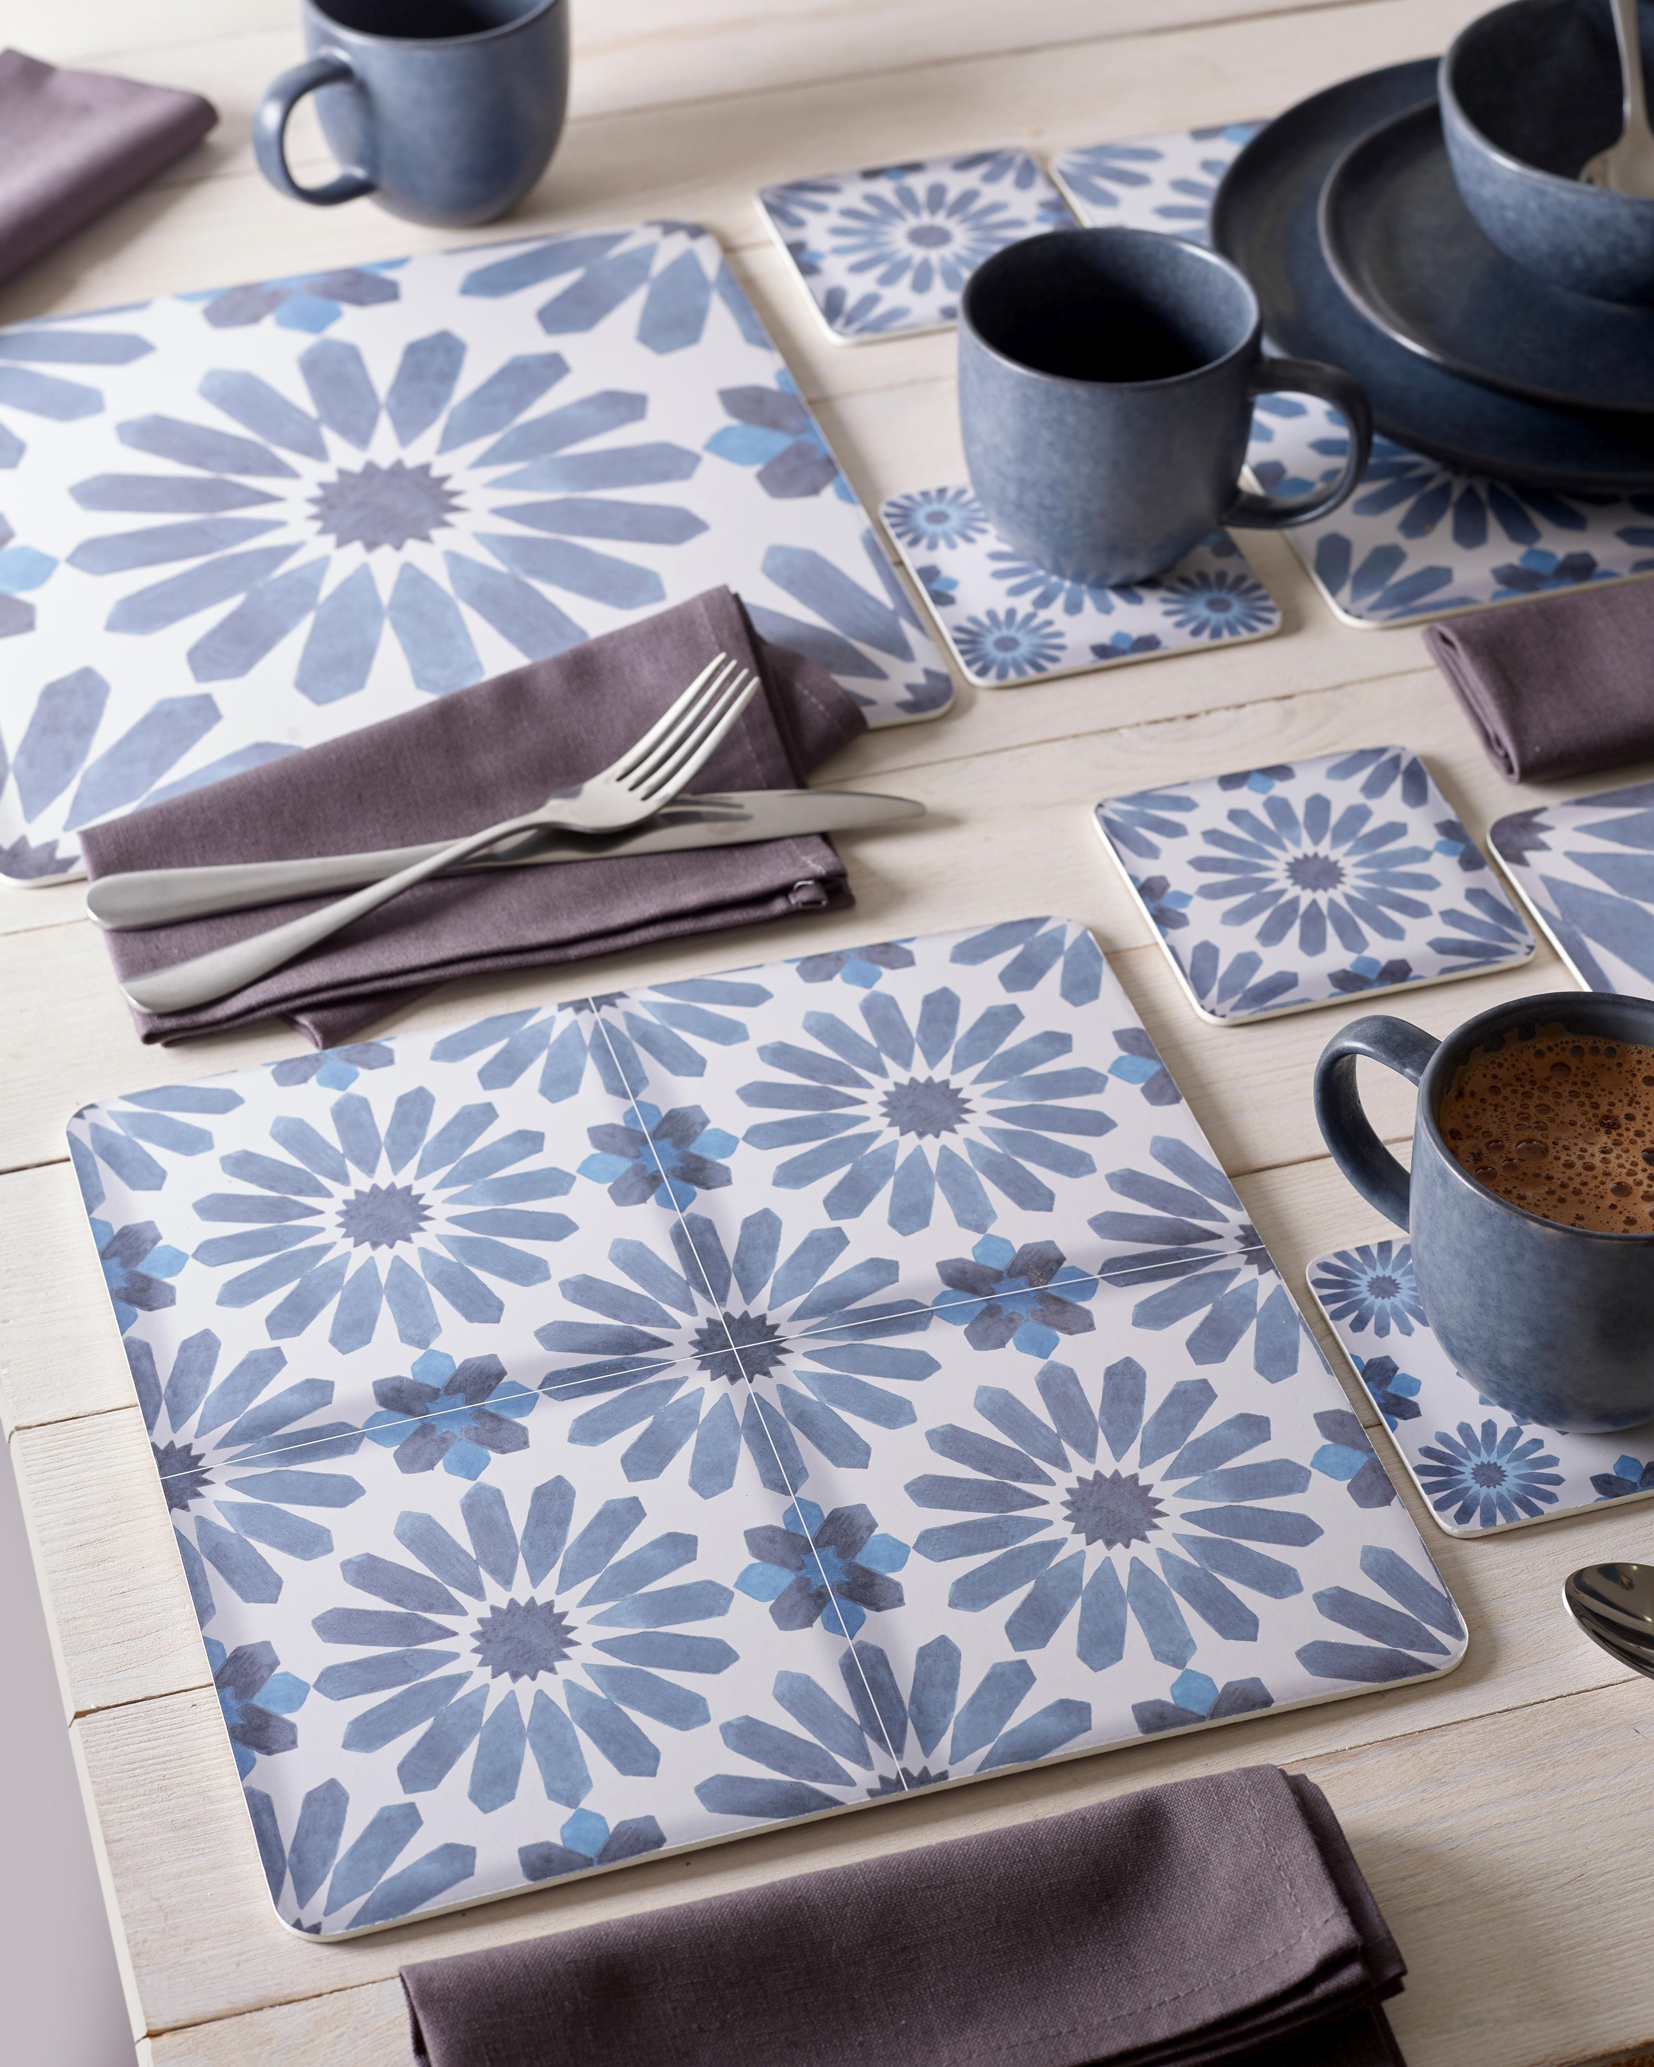 4 Tile Print Placemats And Coasters Set